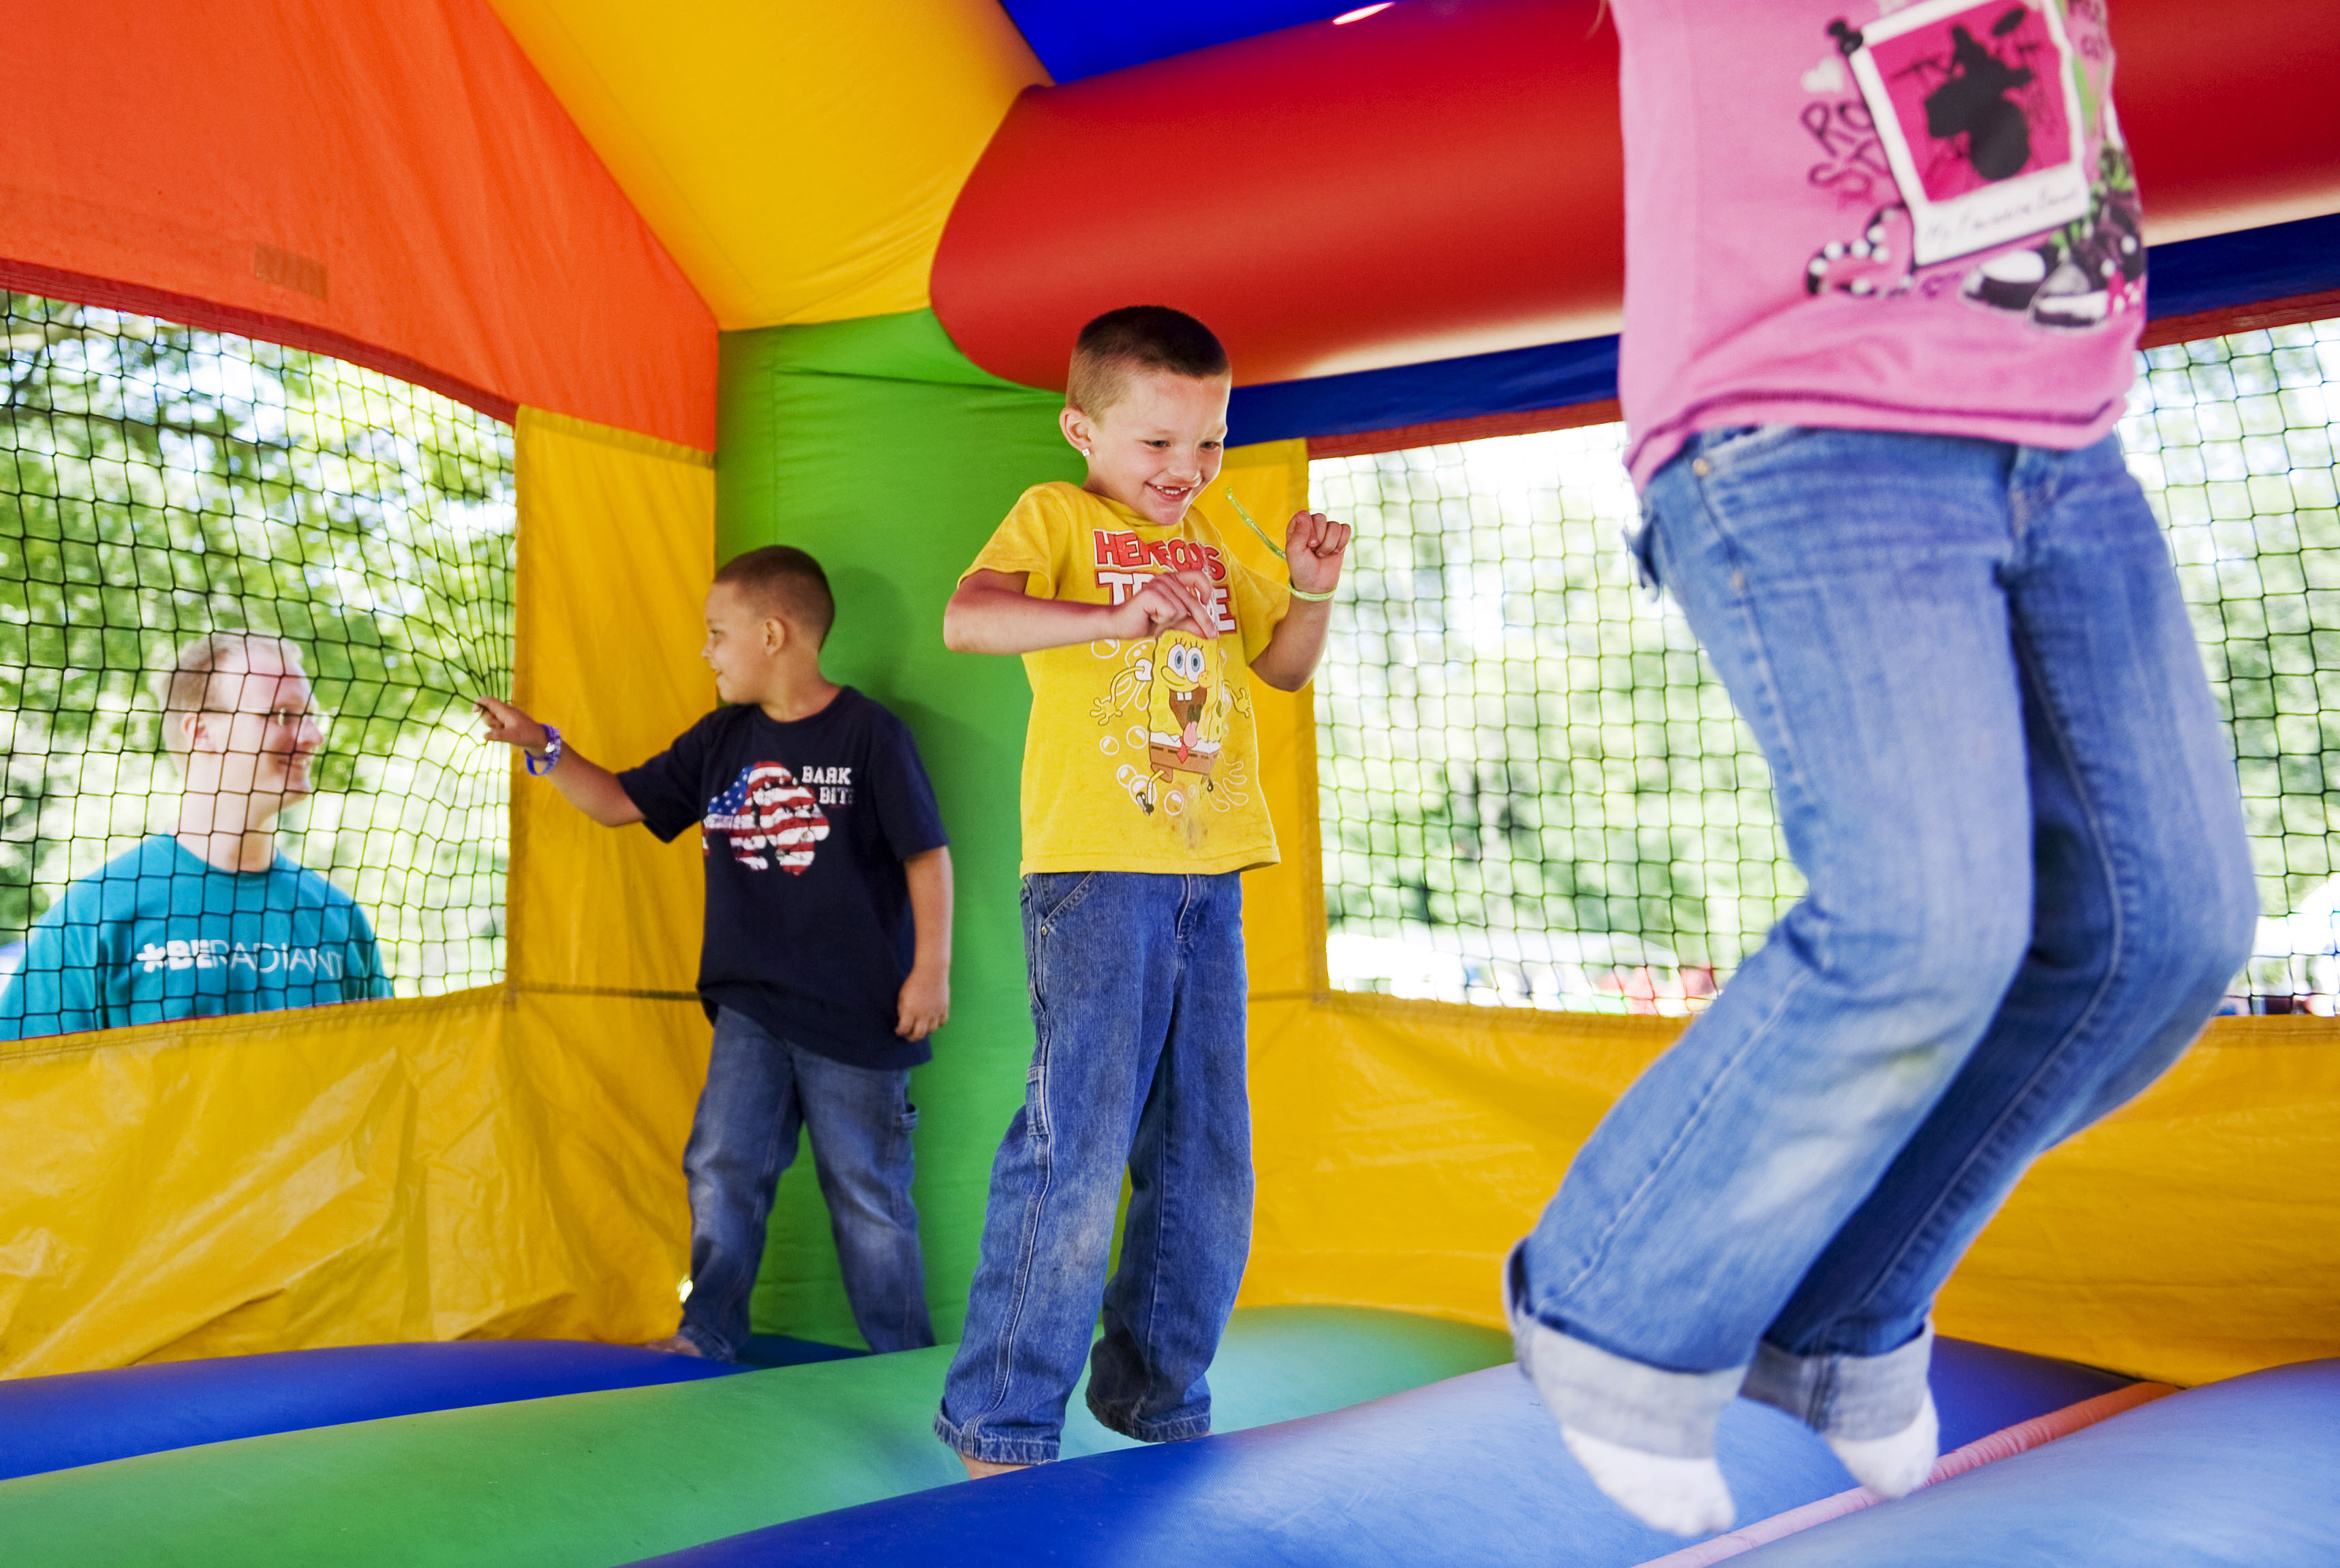 Great bounce house jumping party